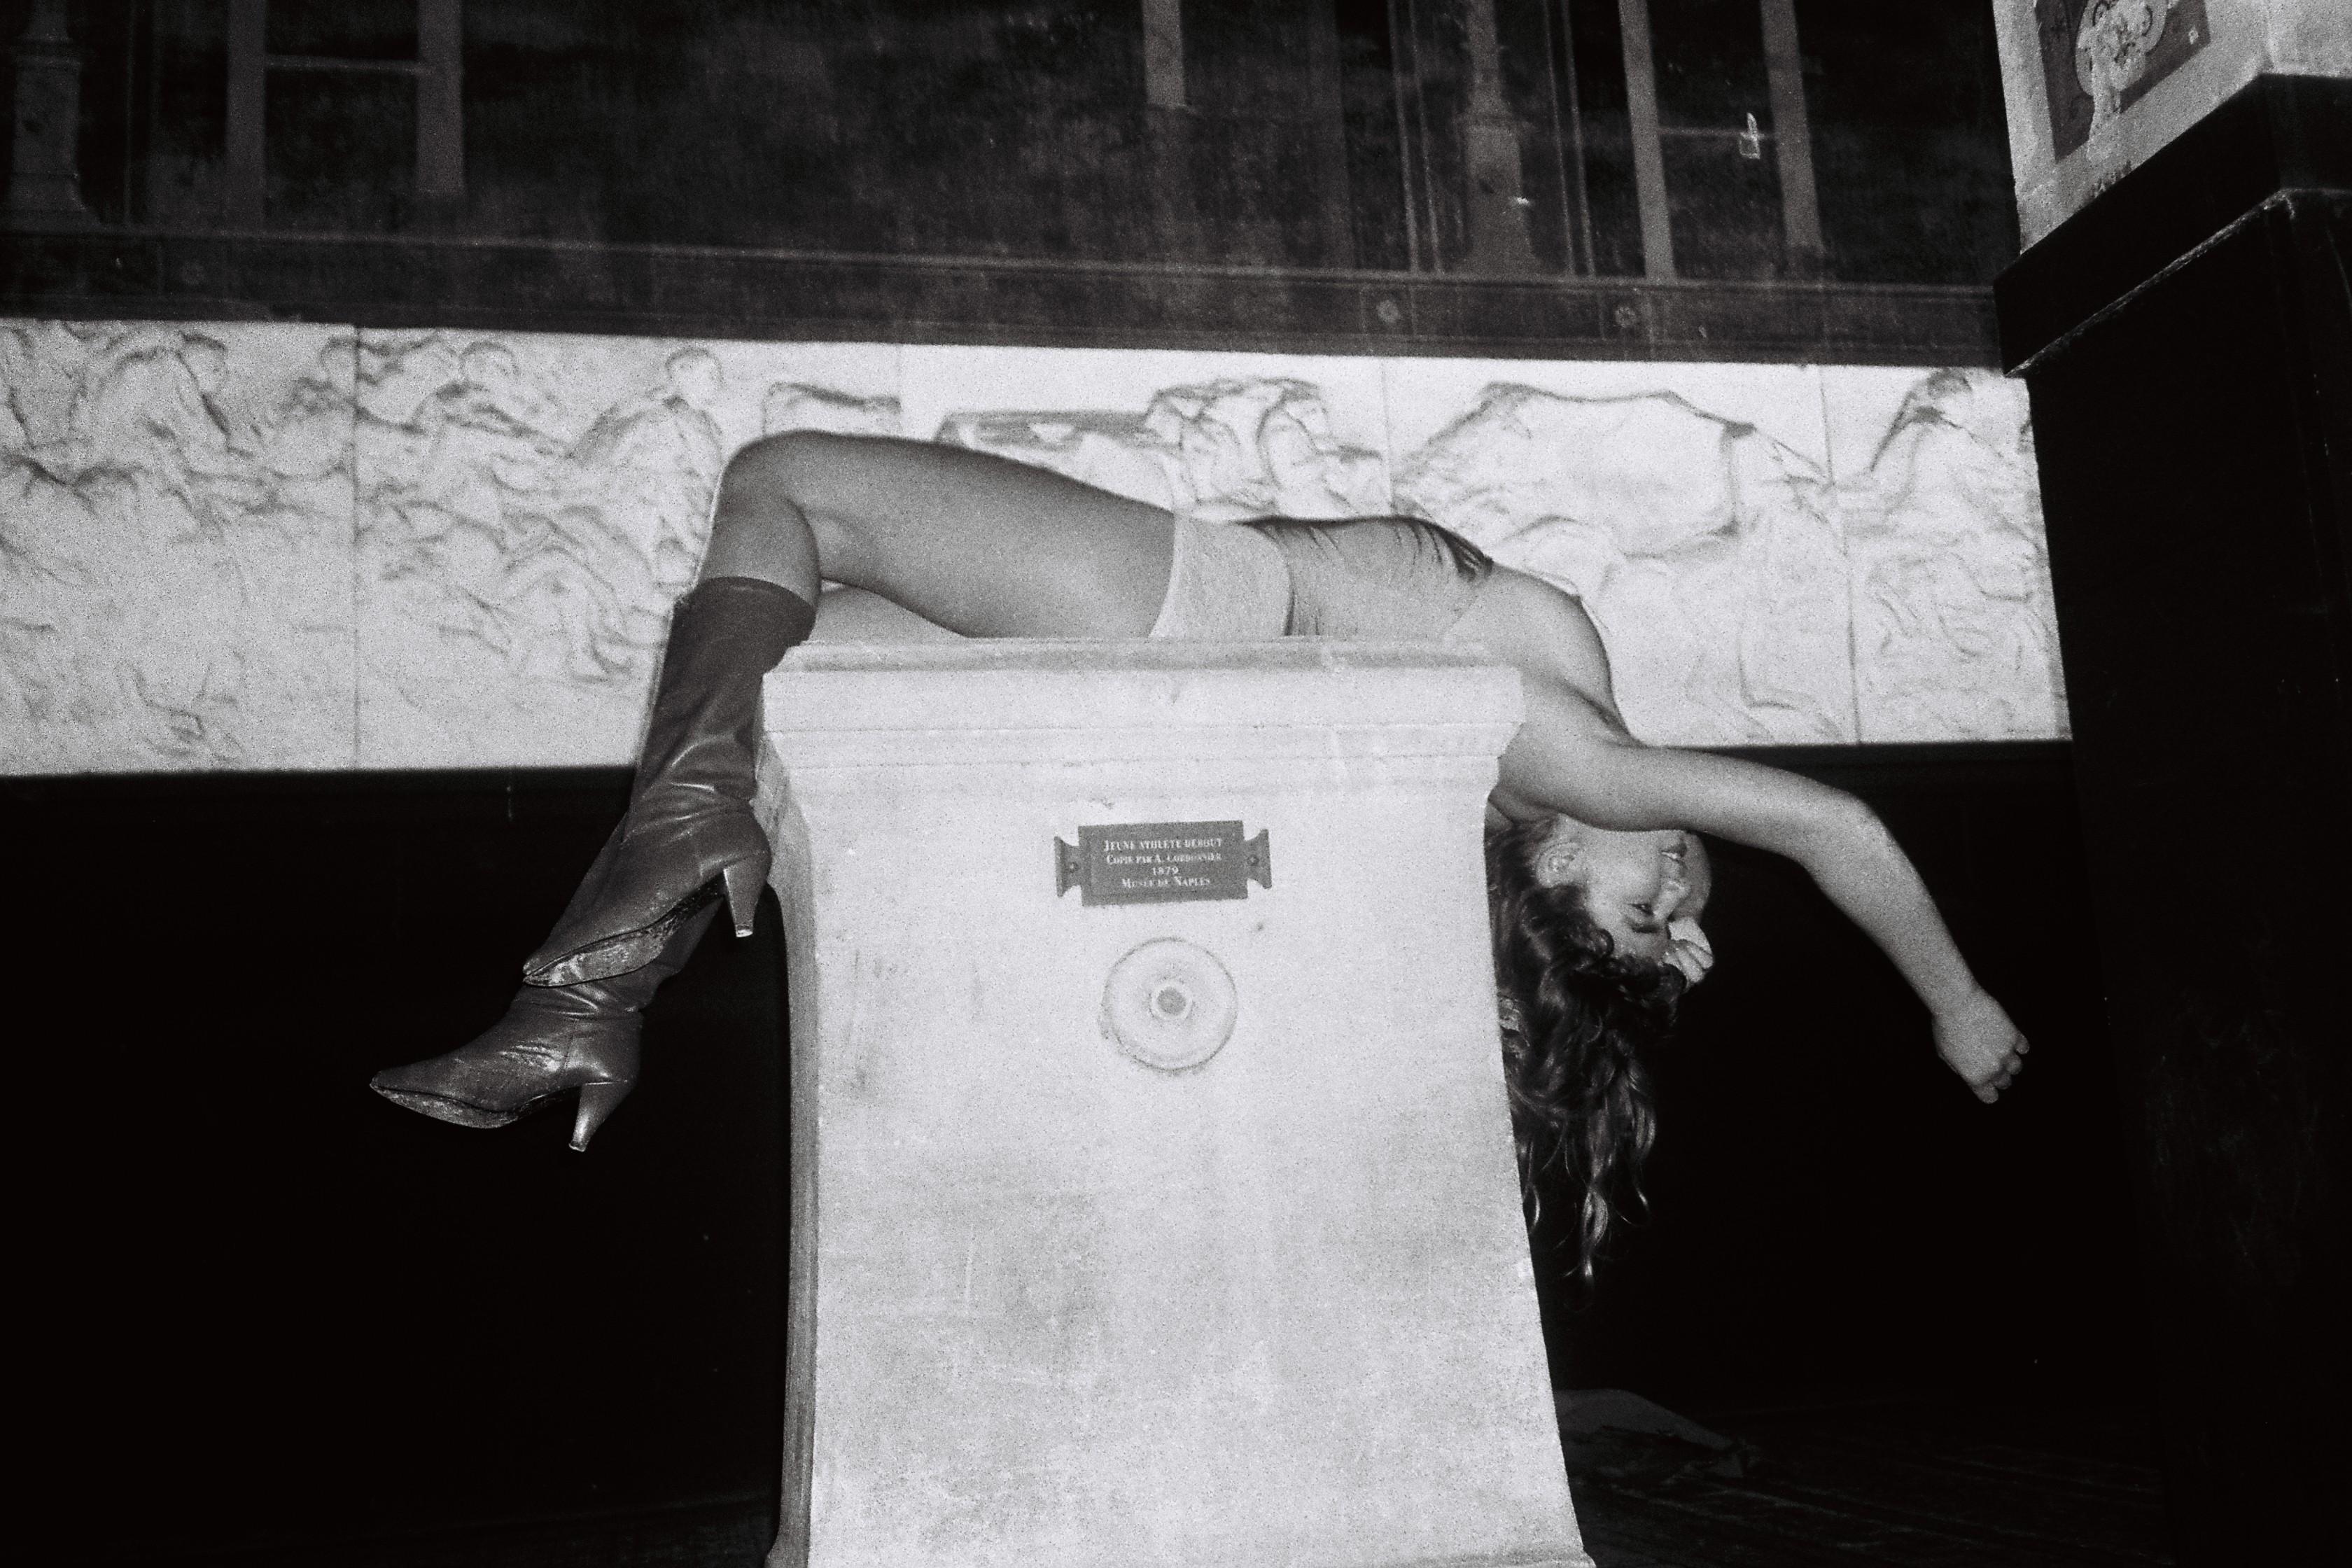 Marianne Marić
TBD
Silver gelatin print
Sheet 80 x 120 cm (31 1/2 x 47 1/4 in.)
Edition of 5, plus 2 AP; Ed. no 1/5
Print only

Marianne Marić looks at the body as architecture and plays with symbolism in her work, often using her close friends as